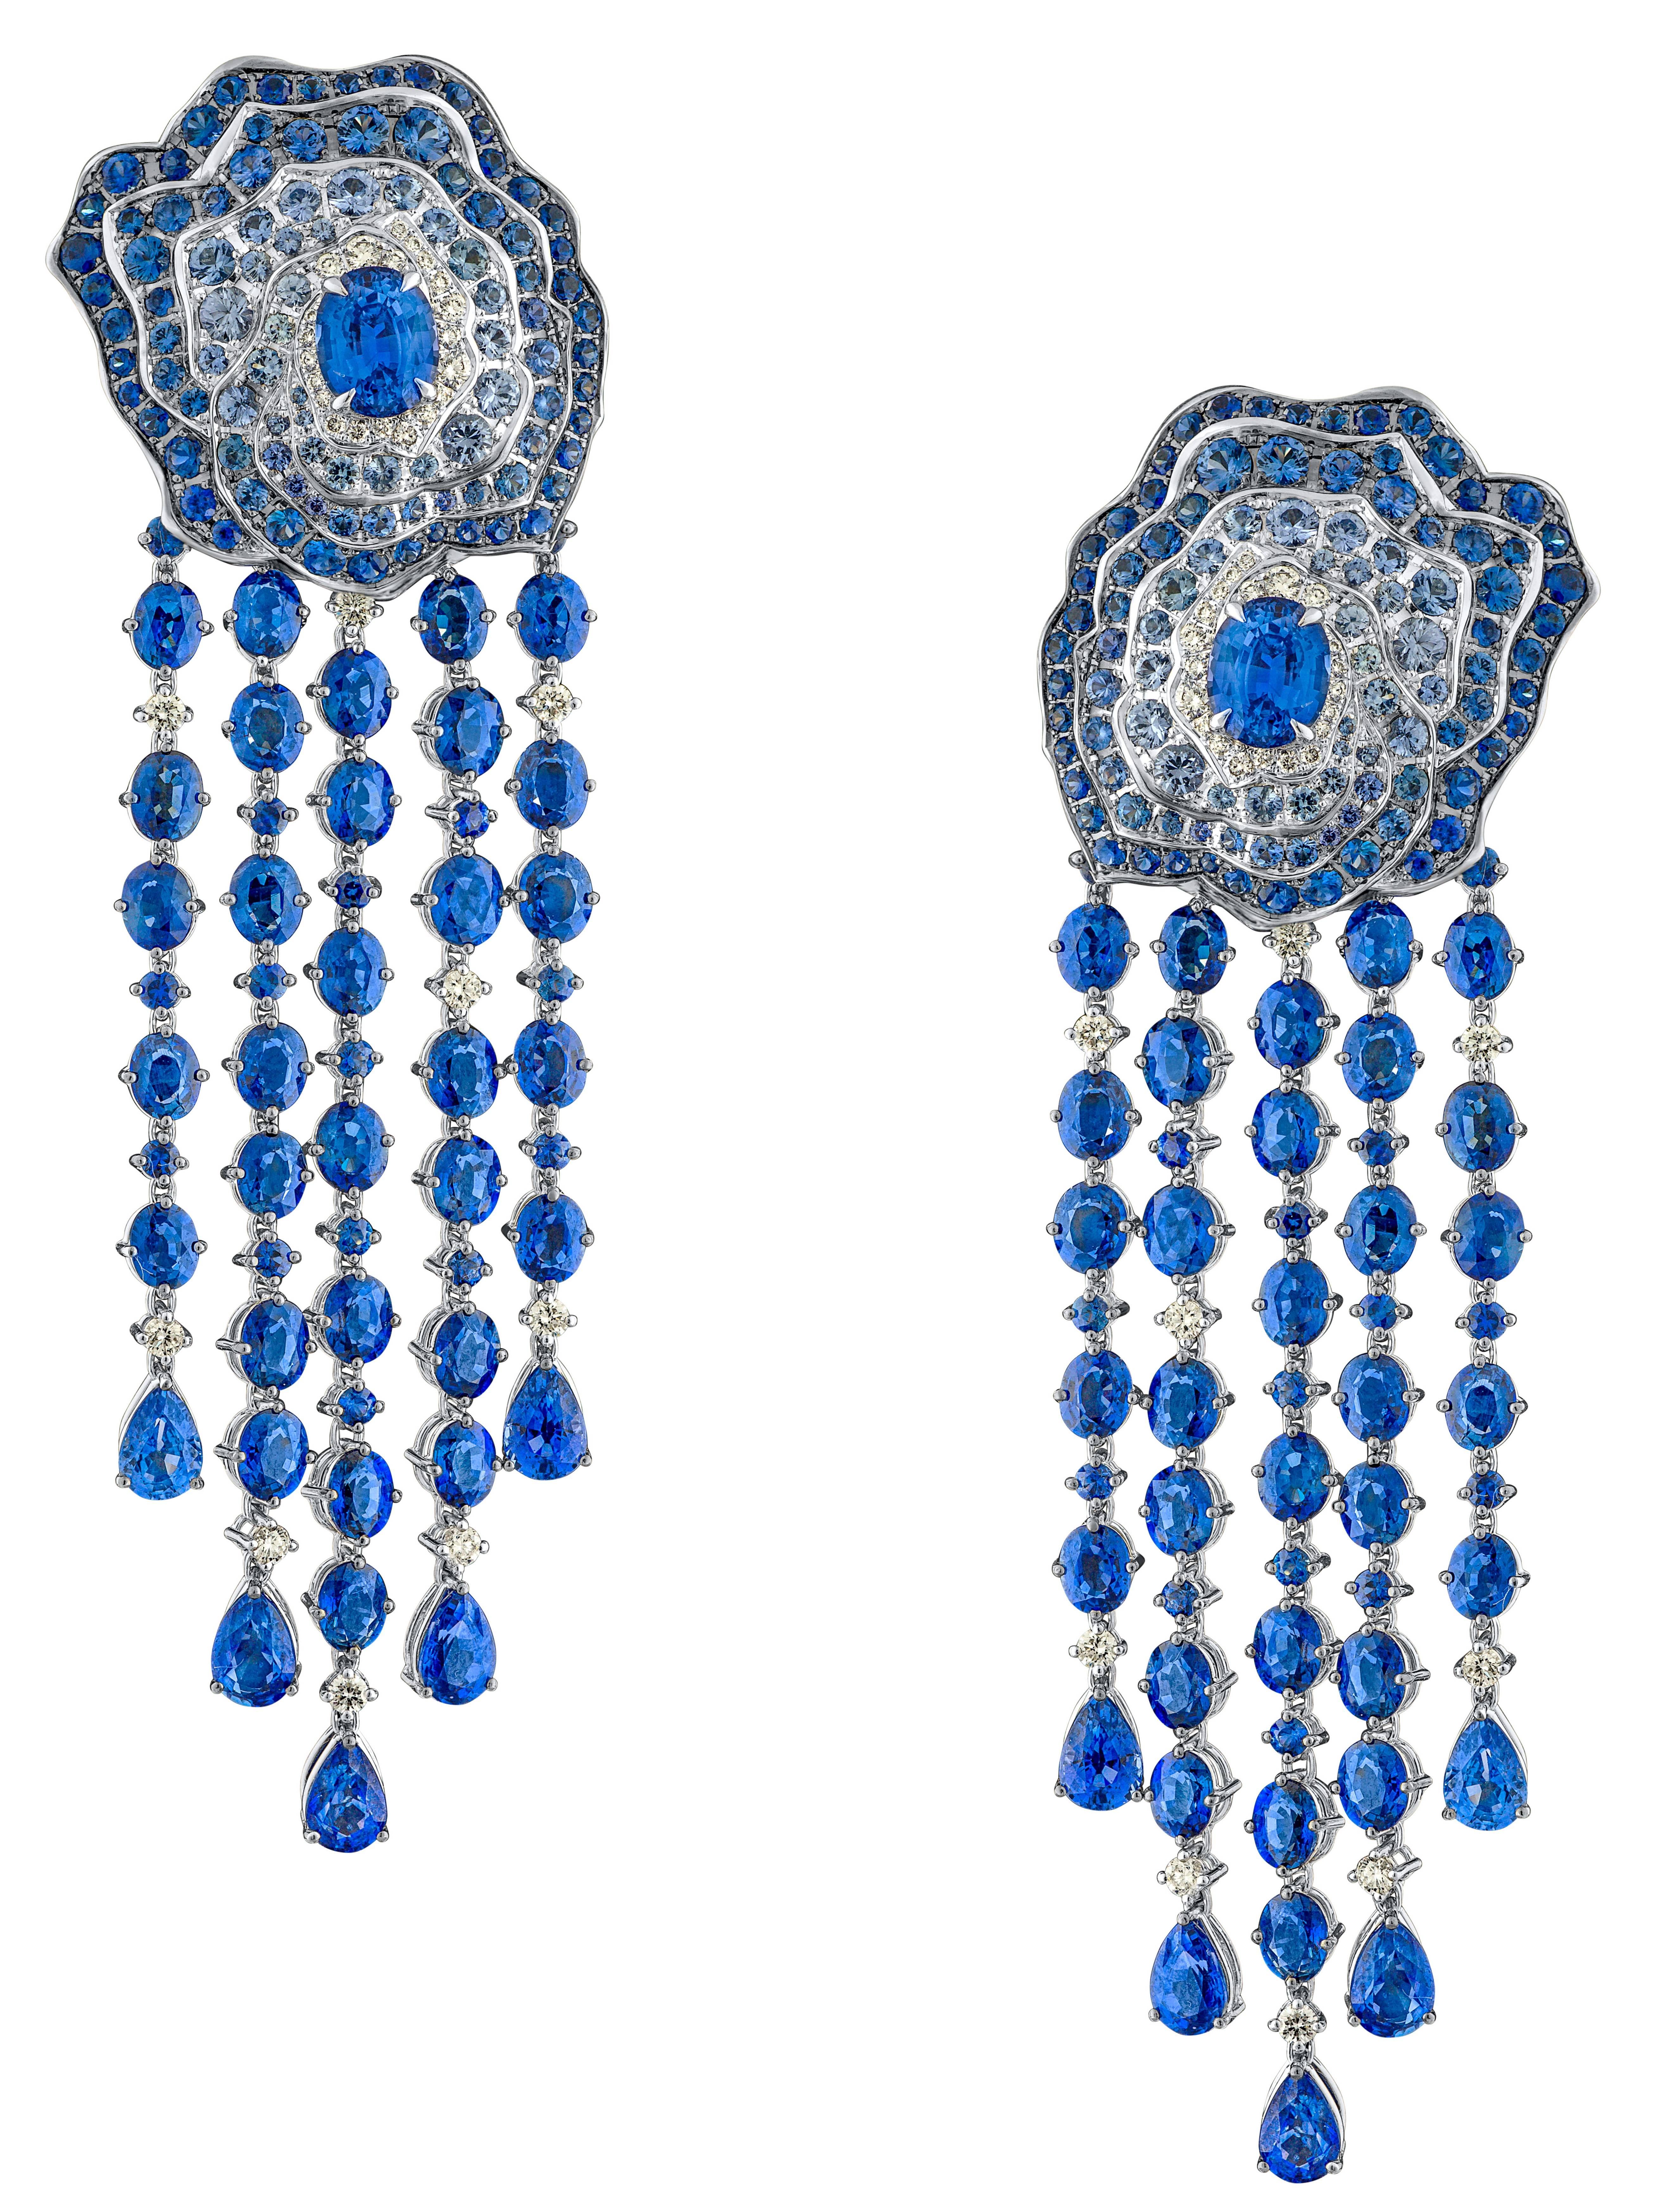 Earrings crafted in 18K white gold (Palladium)                                                               Diamond G VS x62 pieces = 1.00 carats                                                                           Sapphire Graduation x226